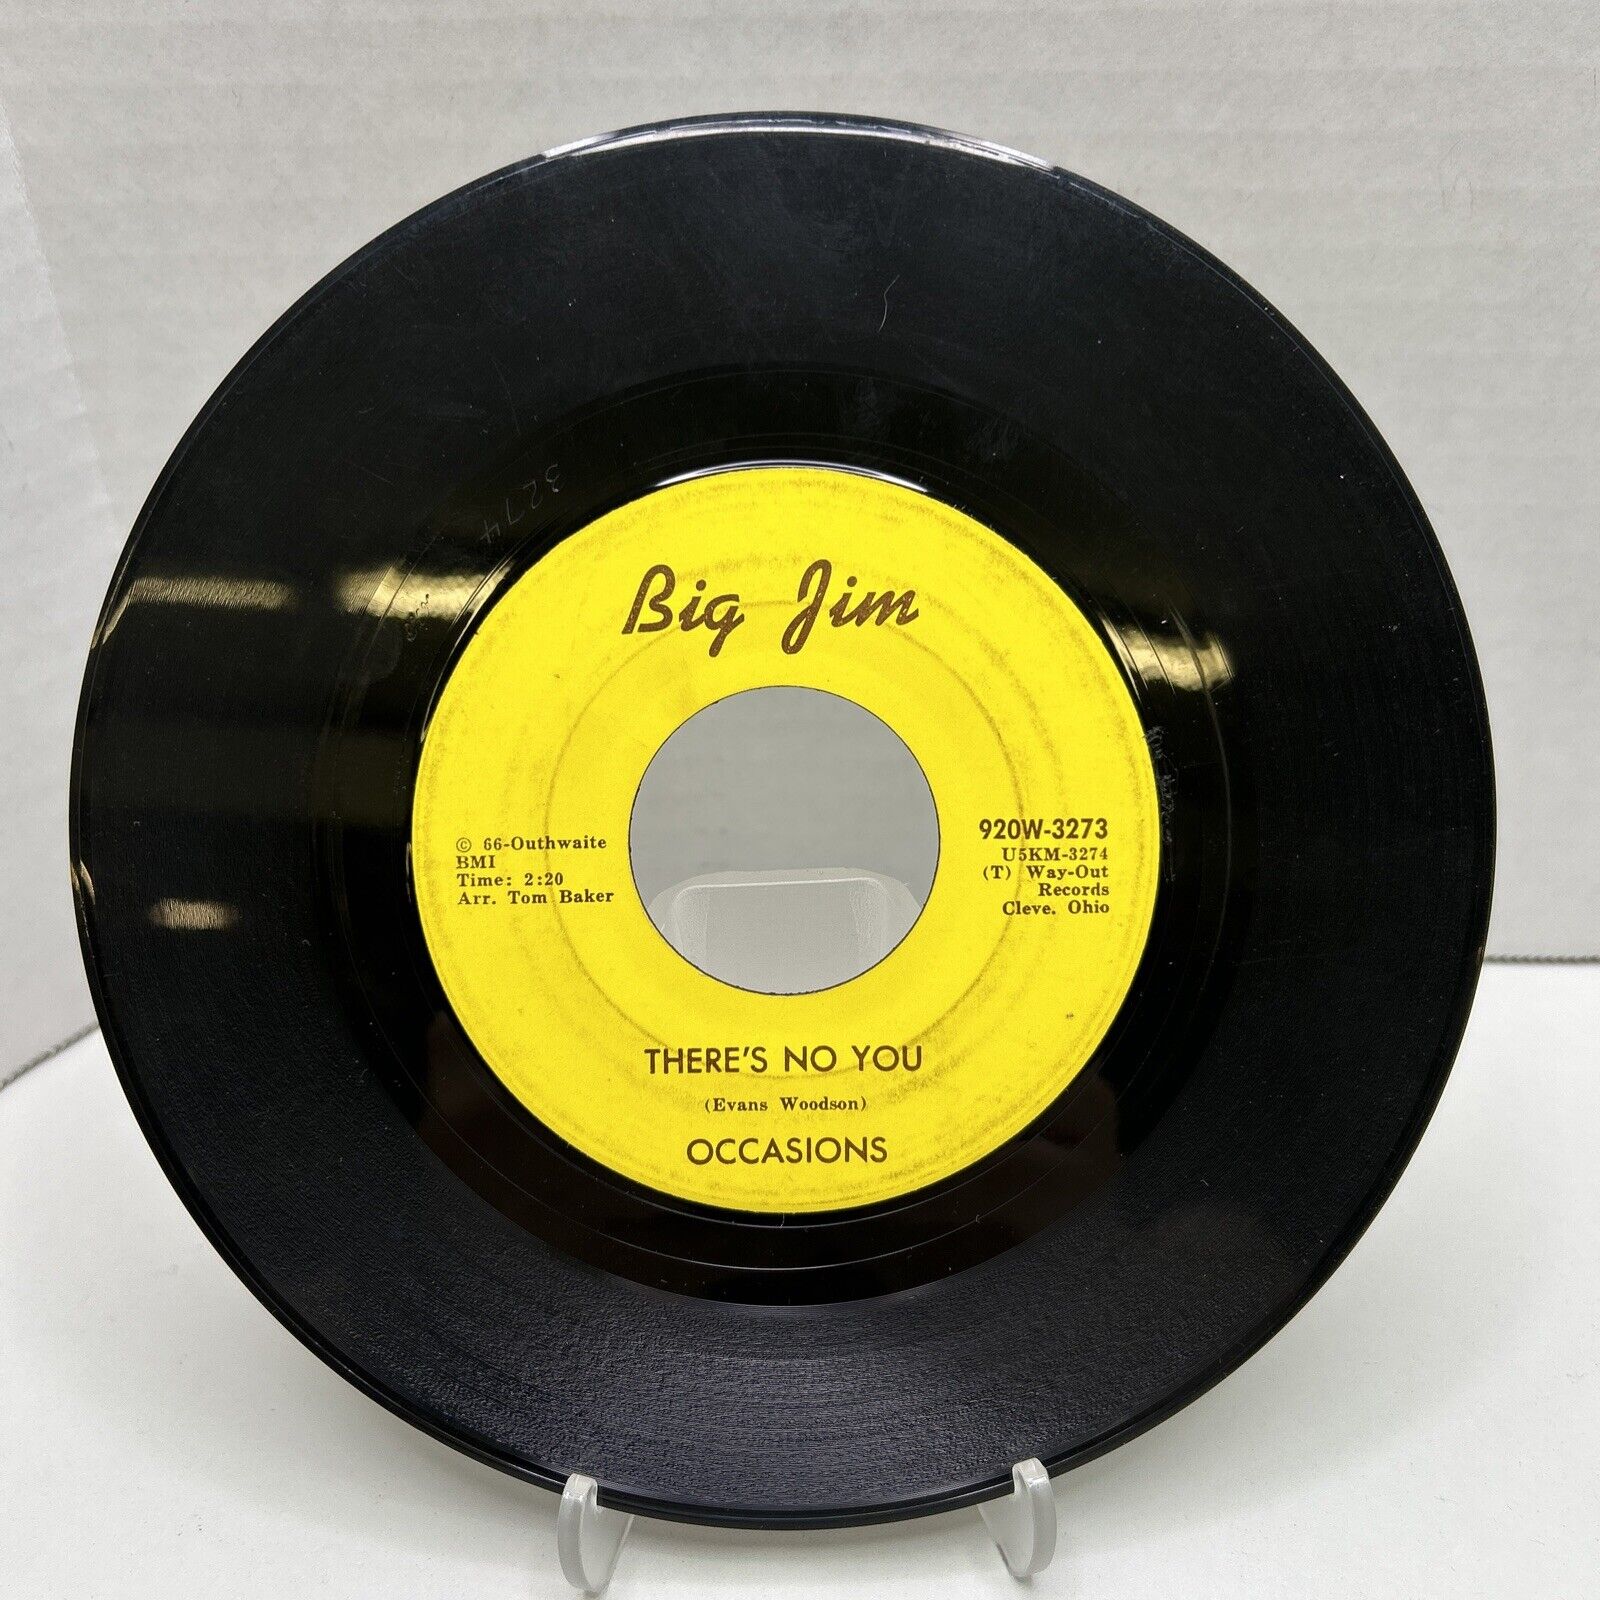 Hear! Northern Soul 45 Occasions - Baby Don't Go / Theres No You On Big Jim